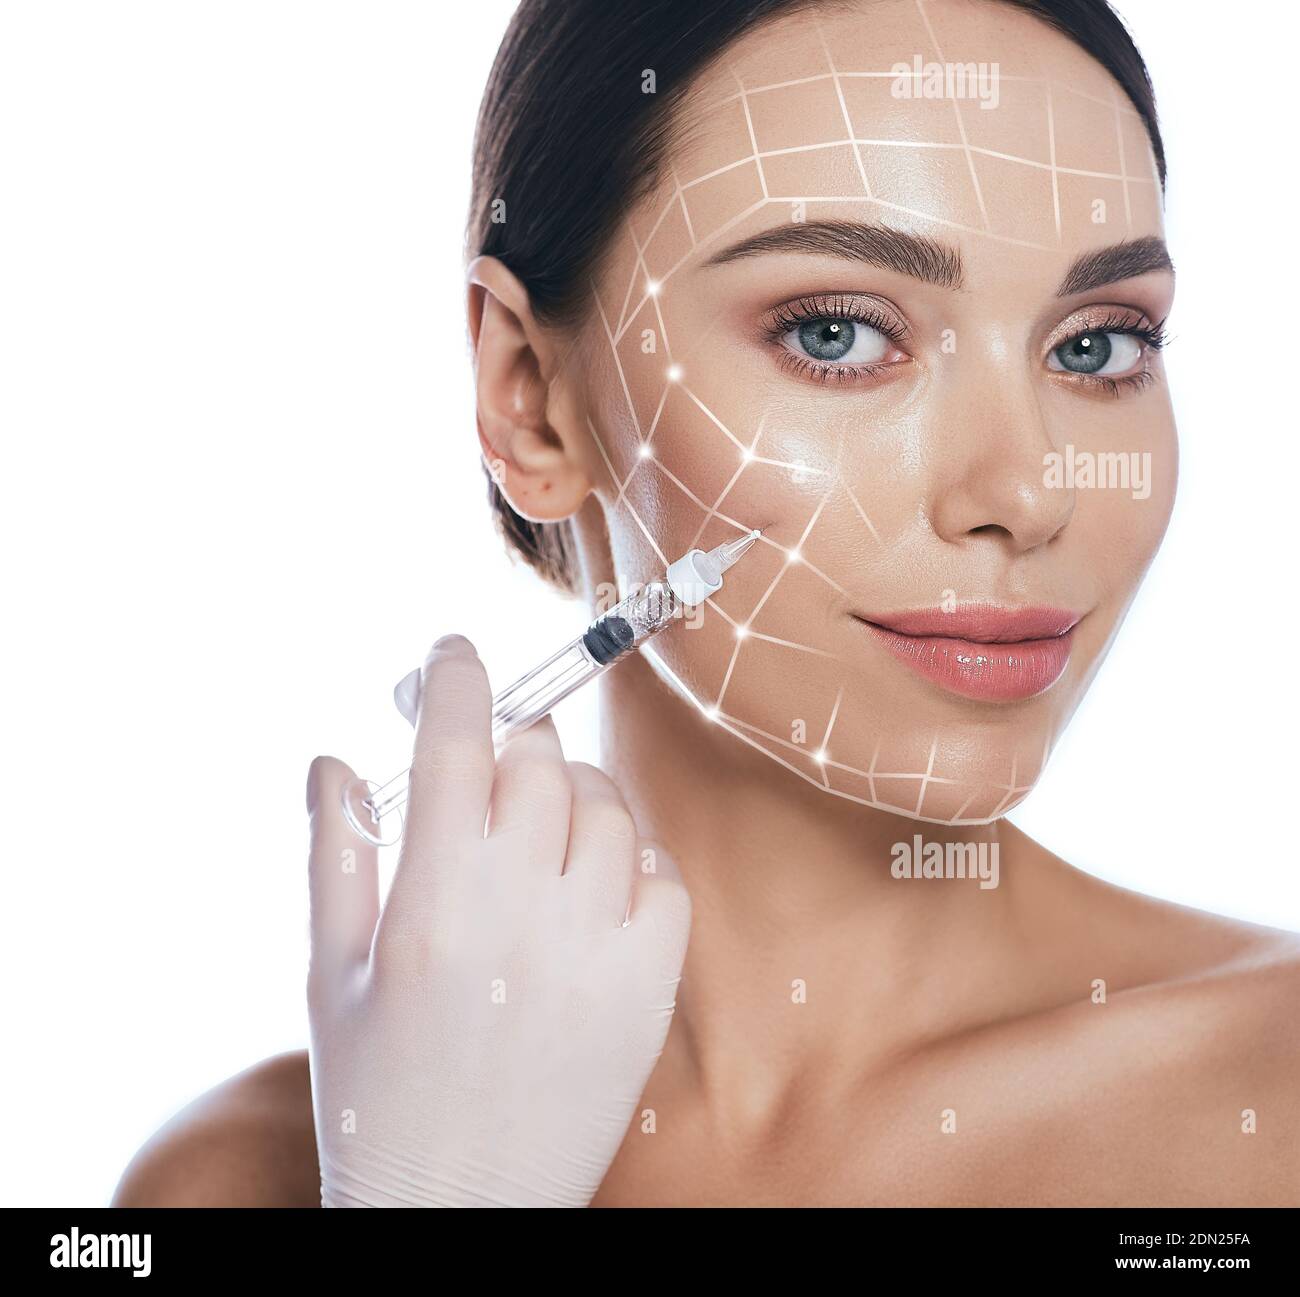 Woman face with lifting lines on skin, showing filler injections for lift skin, cheeks and chin. Anti-aging treatment Stock Photo